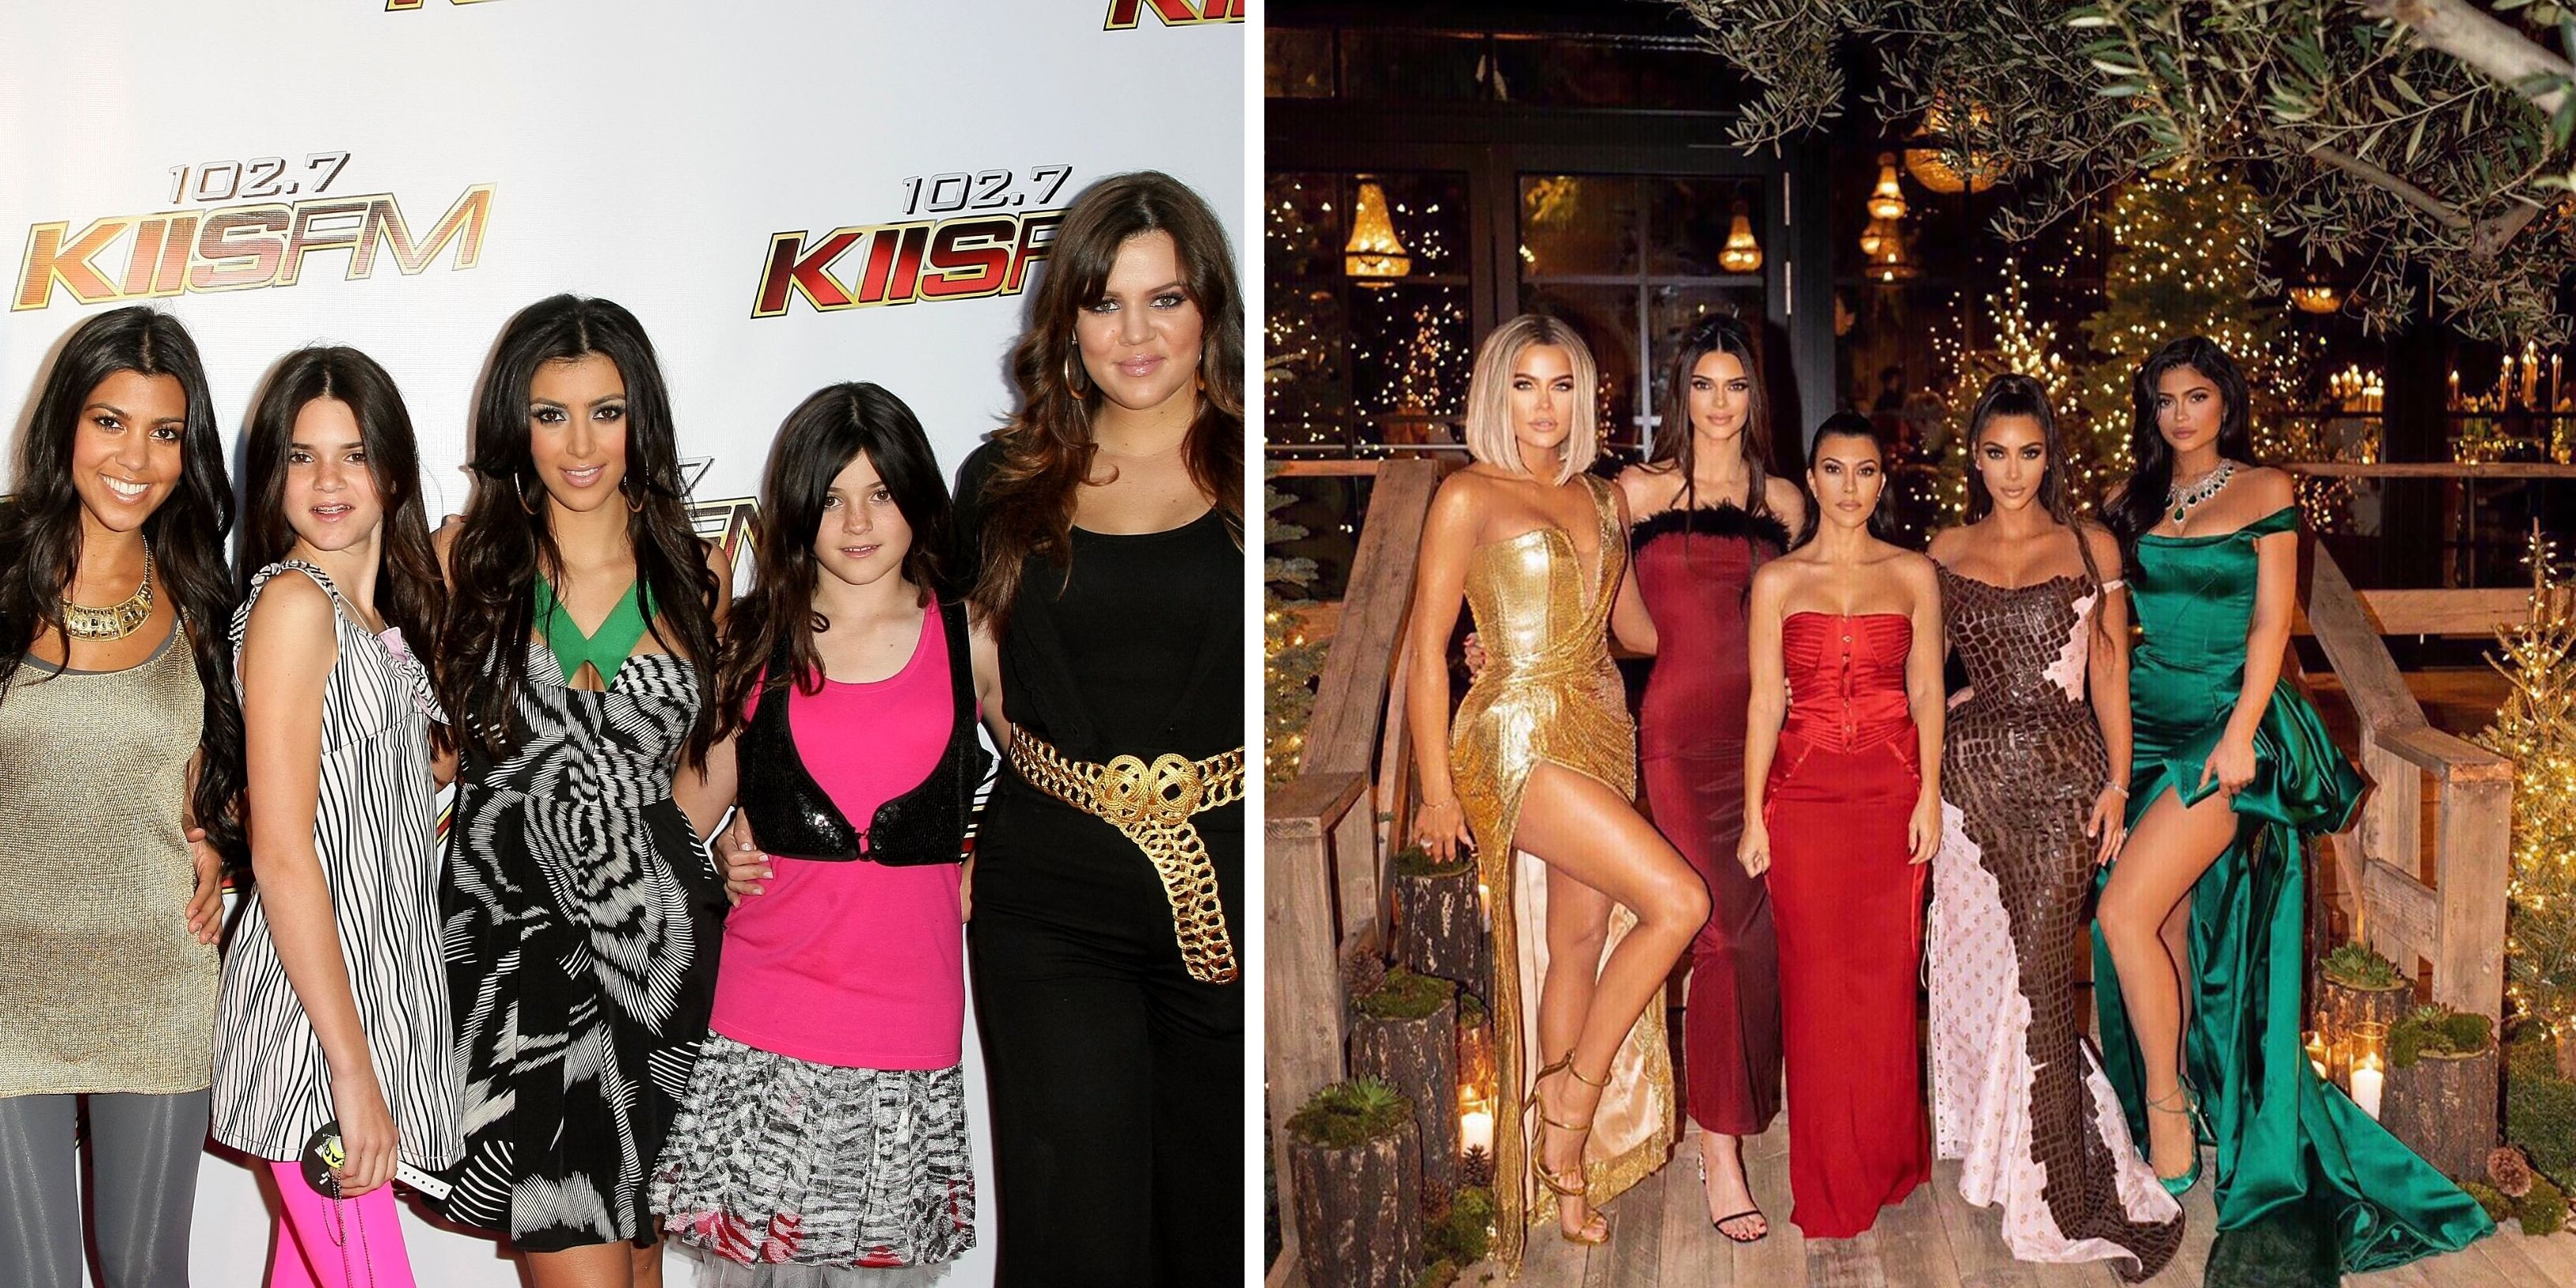 These Pics Show Just How Much The Kardashian-Jenners Clan's Style Has Evolved